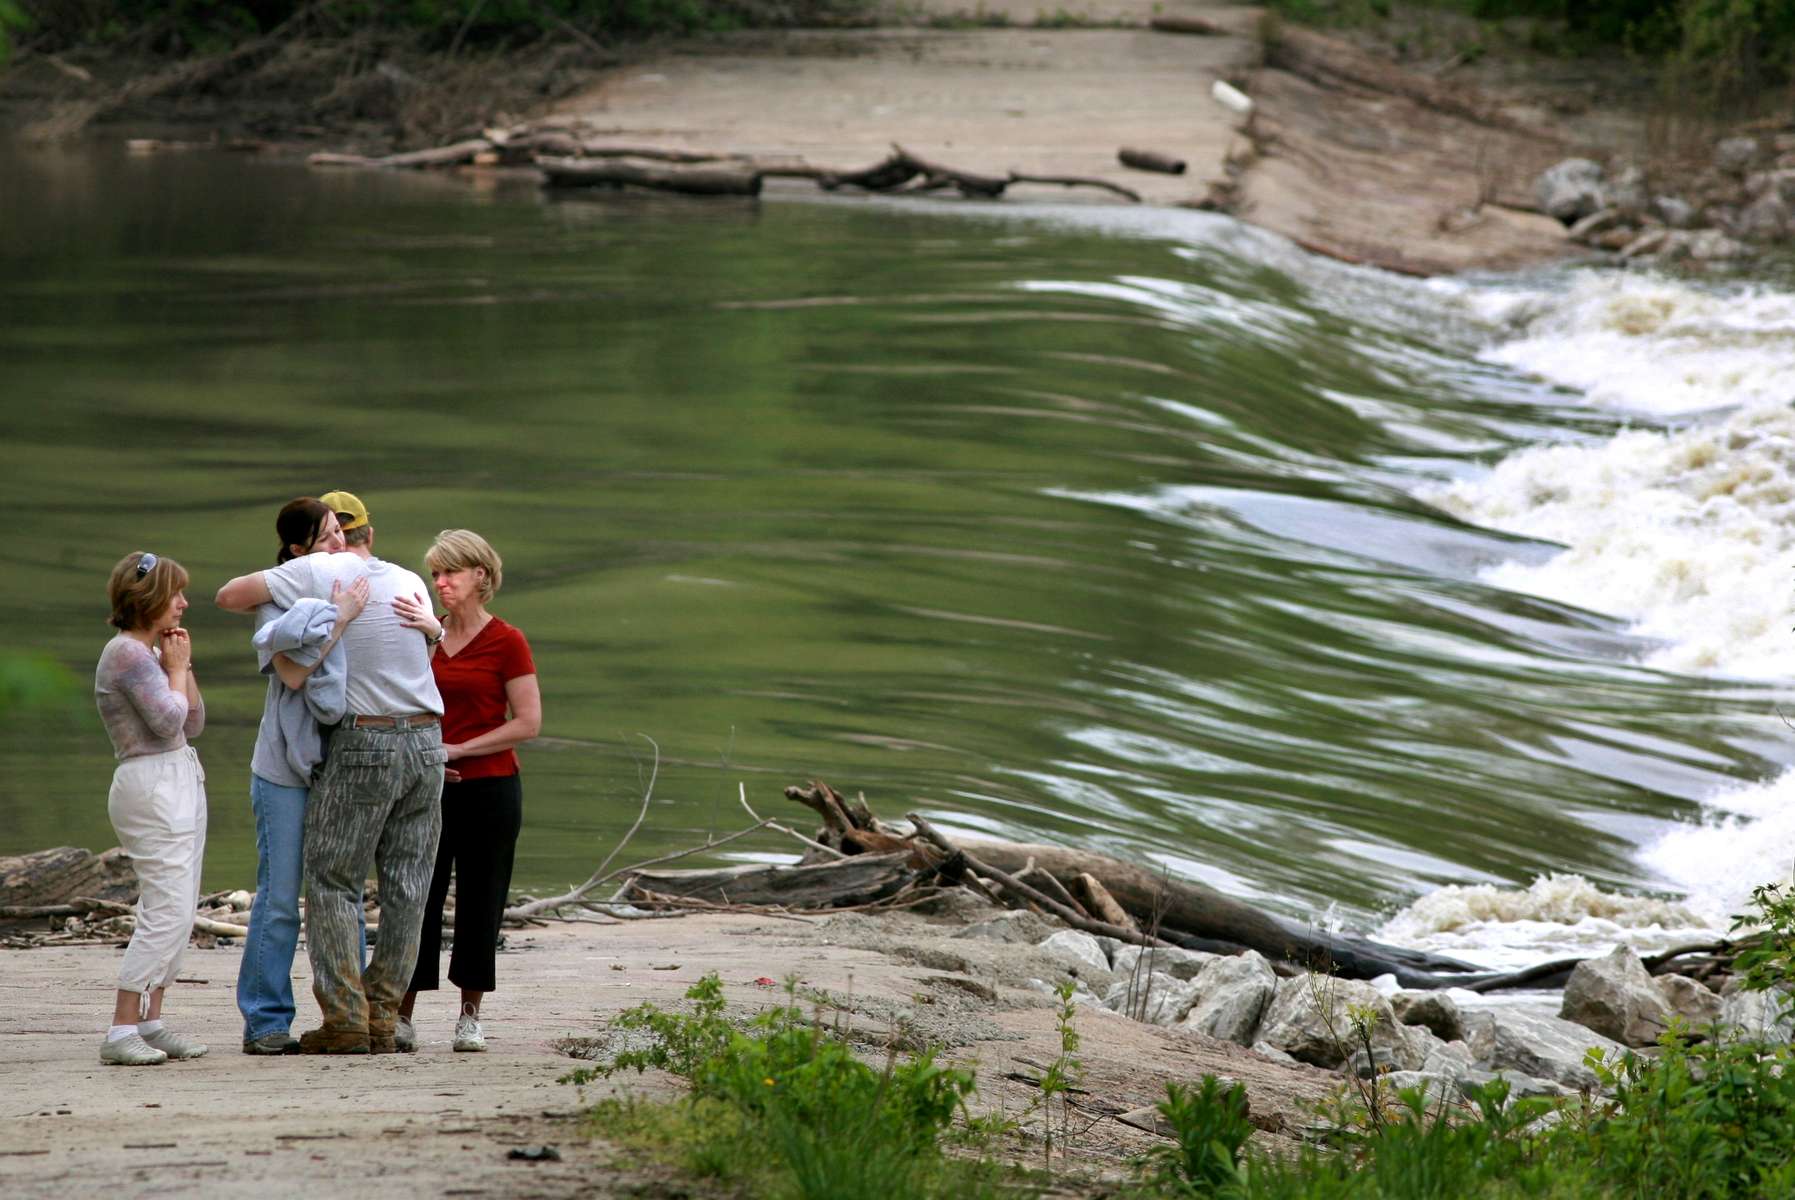 Tuesday May 6, 2008--Friends and family members of 27-year-old Keith R. Fietsam of Winfield, Mo. console each other down by the side of the Missouri River after rescuers called off a four and a half hour search for Fietsam around 11:30 AM on Tuesday.  Fietsam and a friend were crossing the Centaur Chute of the Missouri River when their canoe capsized as they were attempting to cross over to the Howell Island Conservation area to hunt turkeys.  The strong current on river surprised the hunters as it sucked the boat into turbulant water, pictured to the right. Fietsam's hunting partner Leo Geringer clung to the boat and was able to make it to shore.  Rescue workers presume Fietsam is dead.  Divers will resume efforts to find Fietsam's body on Wednesay morning. David Carson | Post-Dispatch